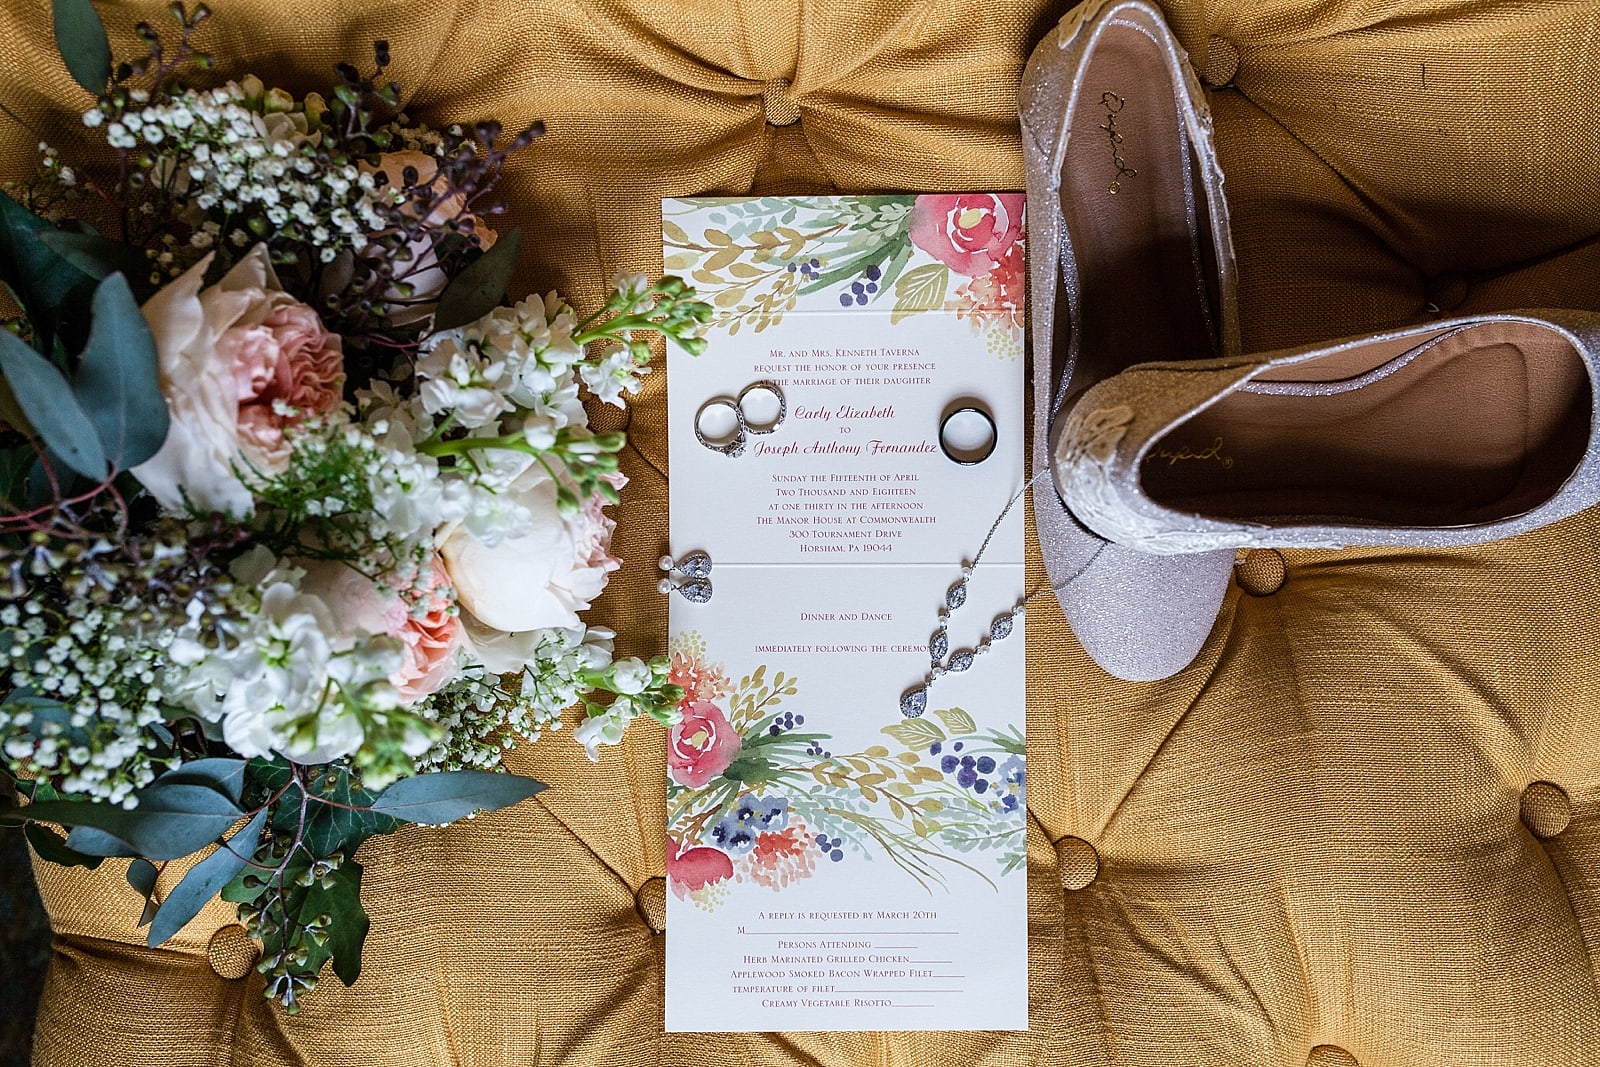 wedding invitation, wedding bands, accessories, and shoe details